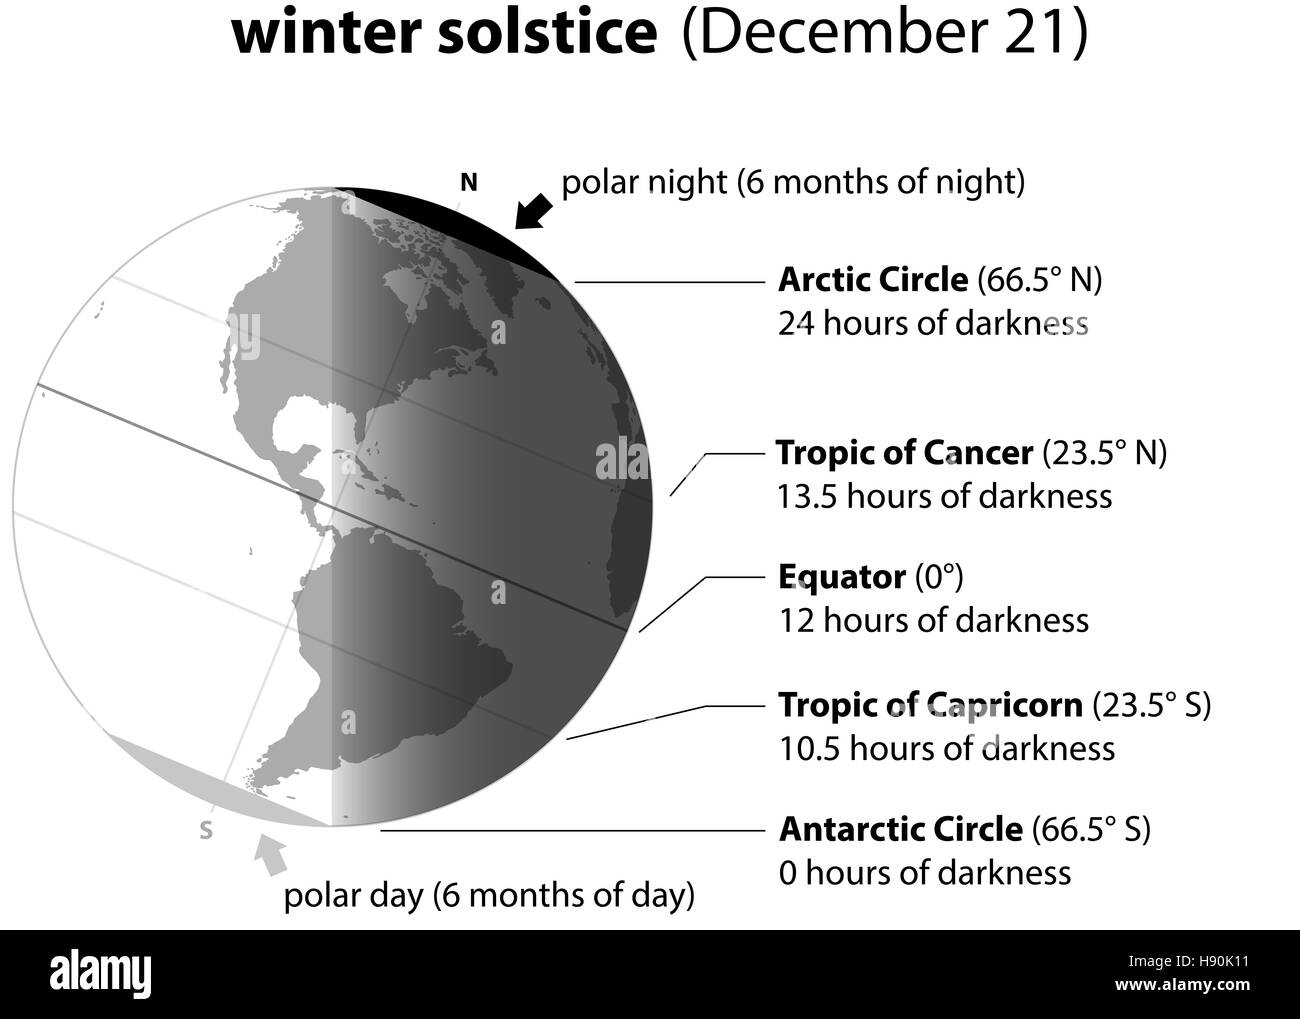 Winter solstice on december 21. Planet earth with accurate description. Stock Photo